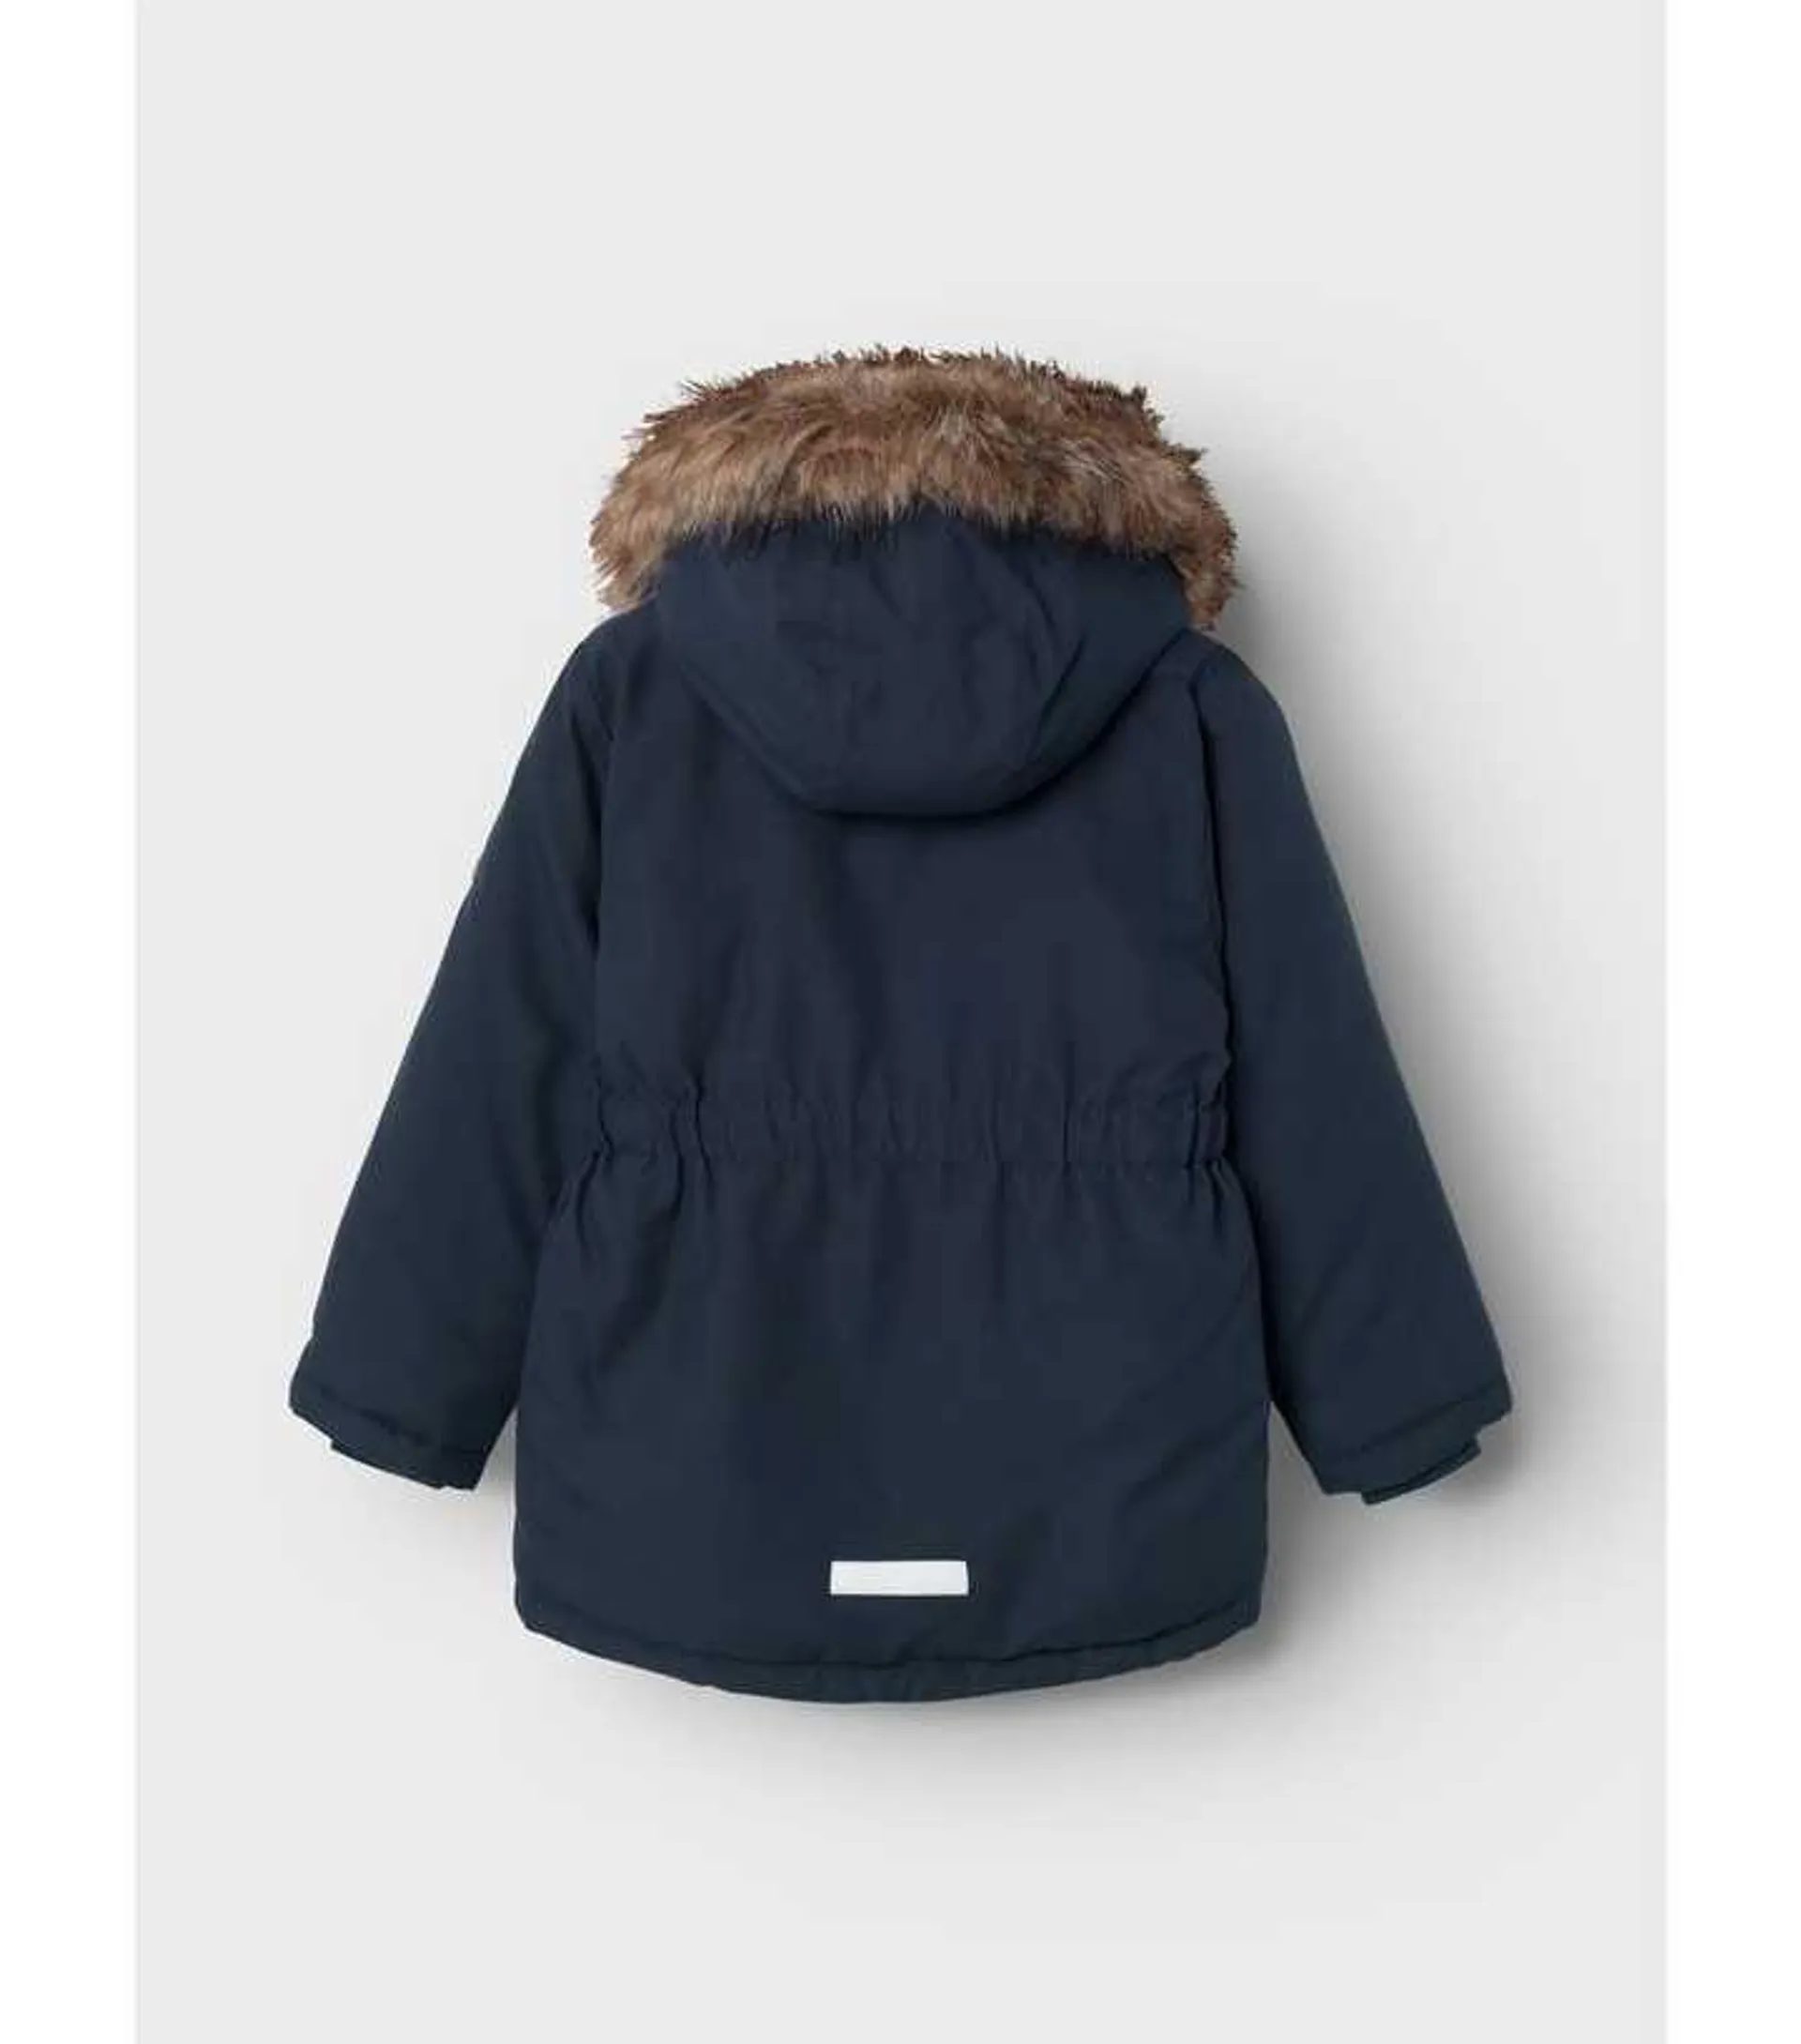 Name It Navy Faux Fur Hooded Parka Jacket Add to Saved Items Remove from Saved Items